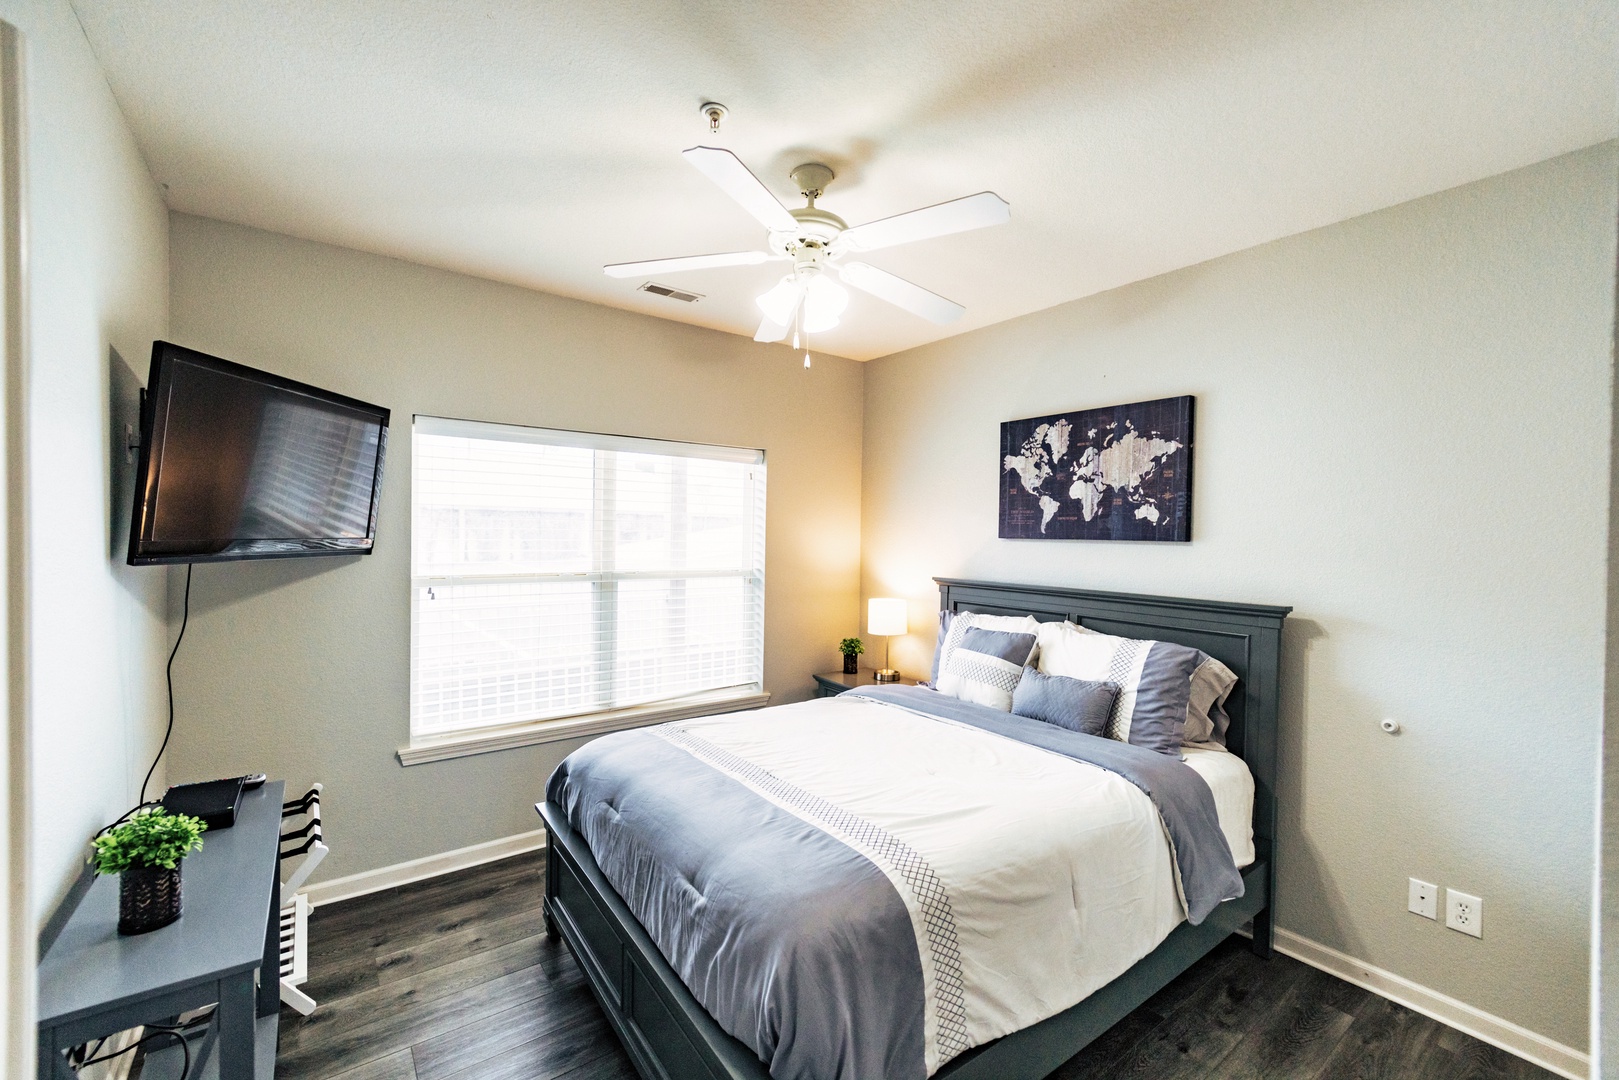 The final serene bedroom offers a queen-sized bed & TV